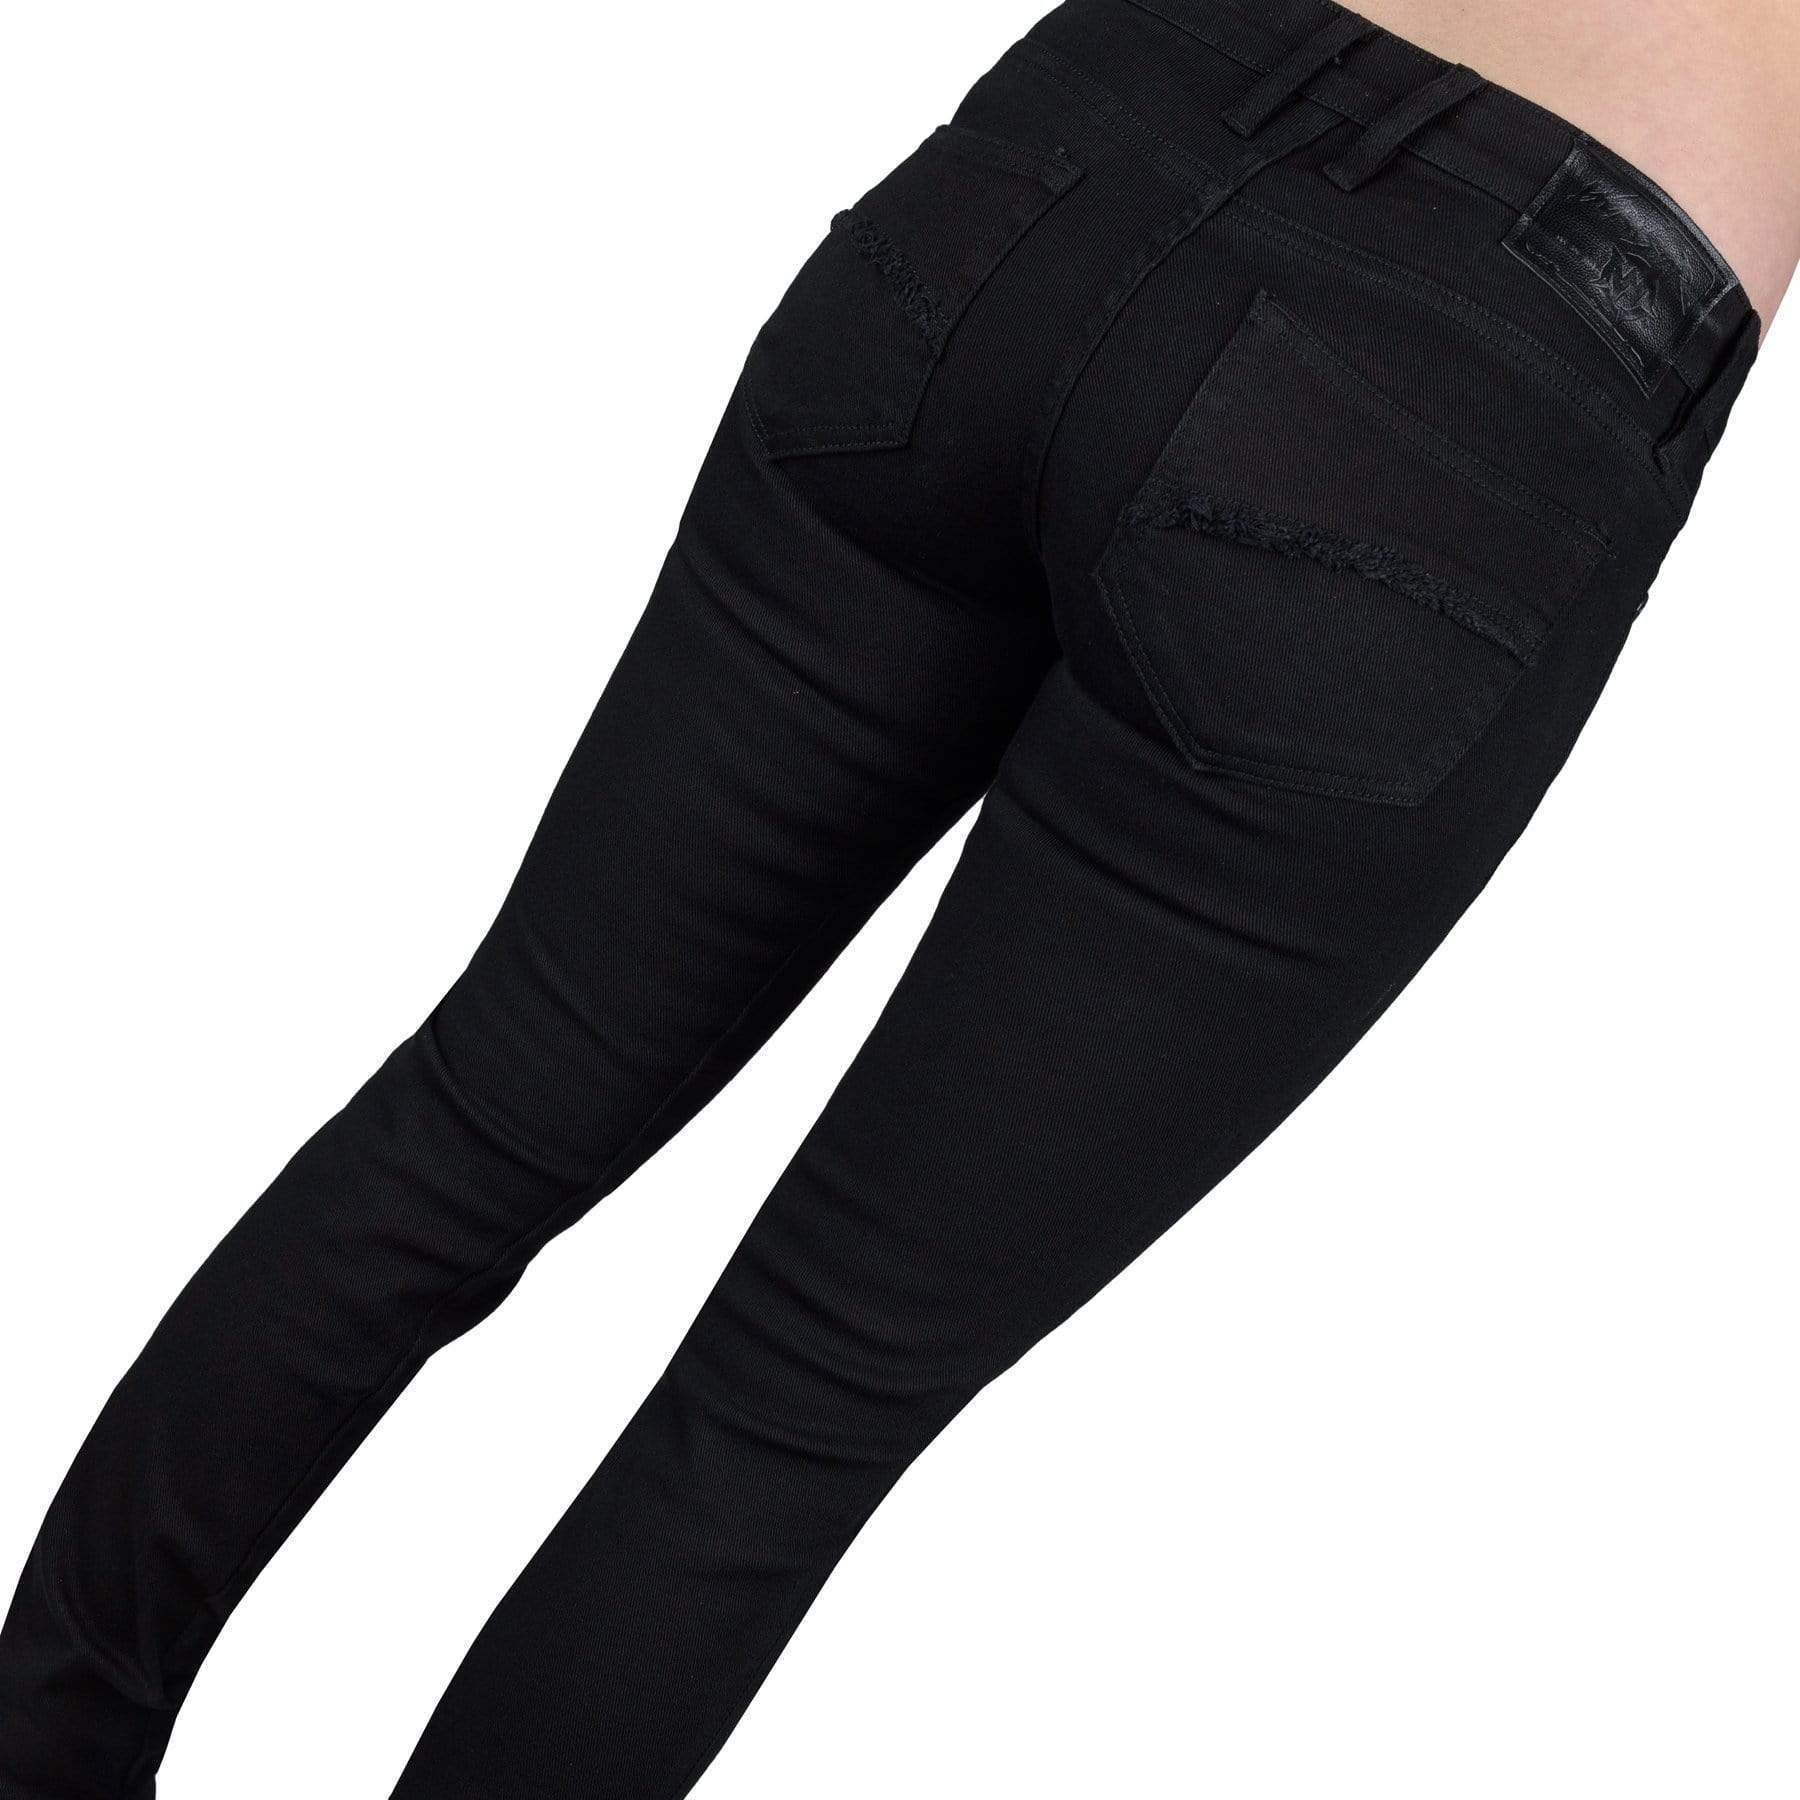 Essentials Collection Pants Rampager Unisex Jeans - Black